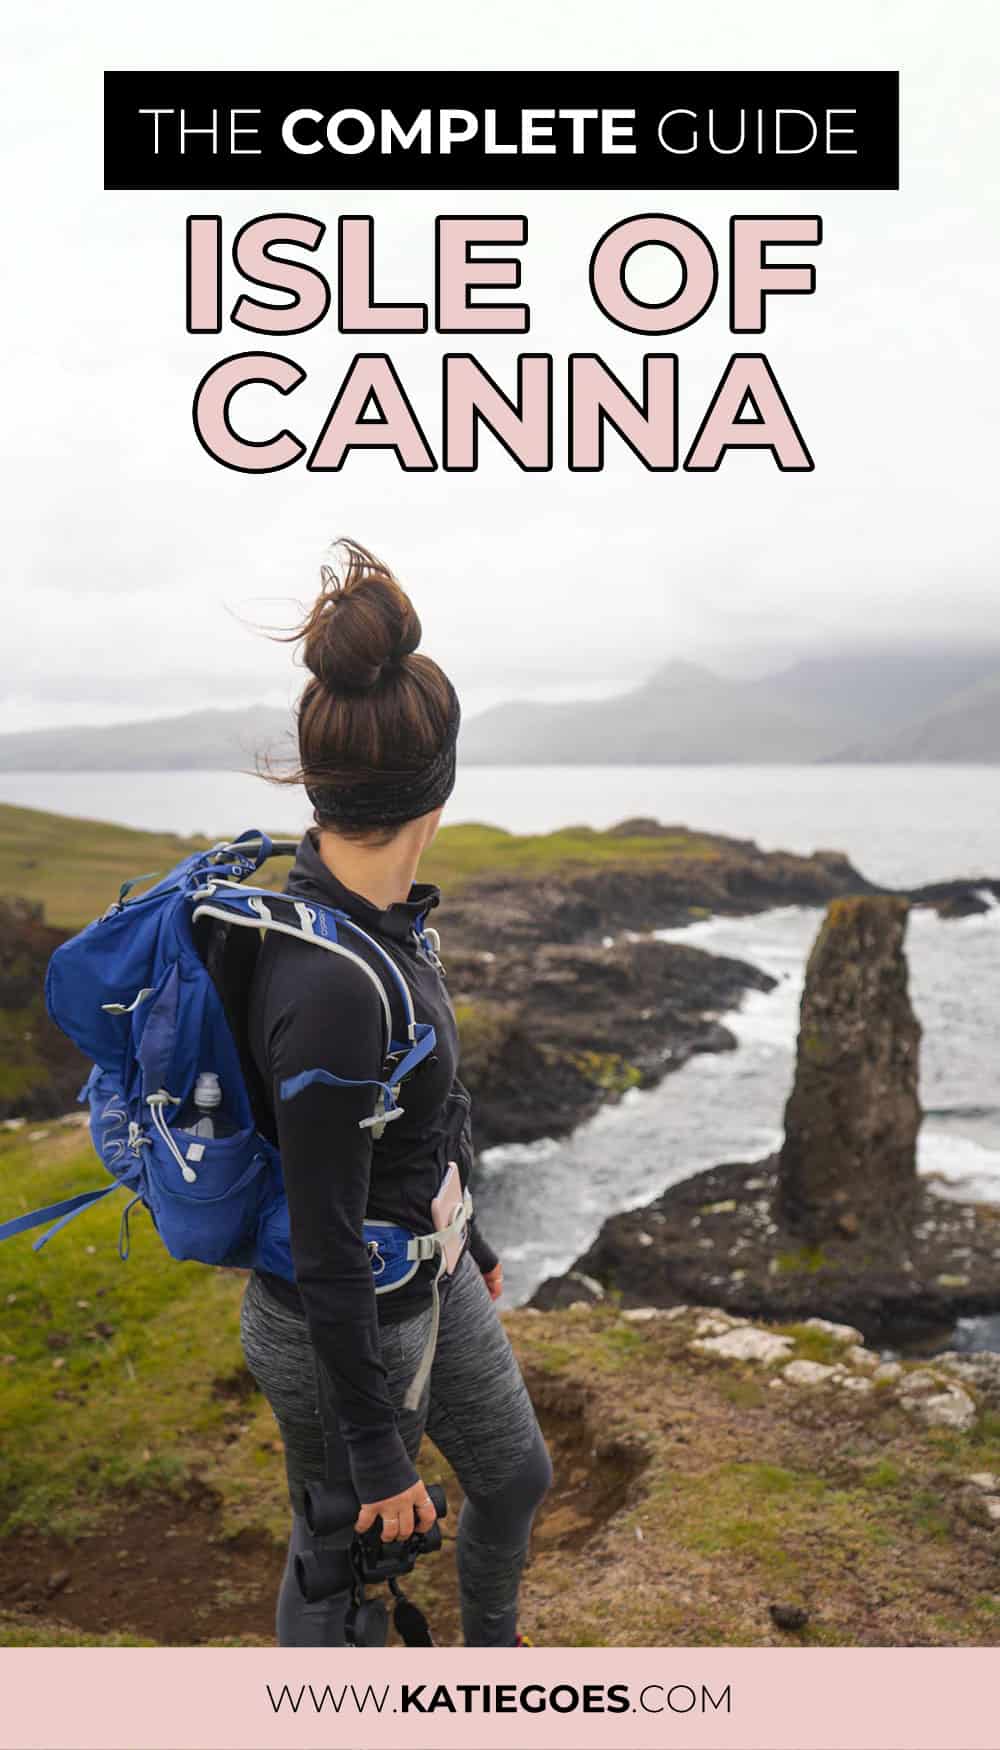 The Complete Guide to the Isle of Canna